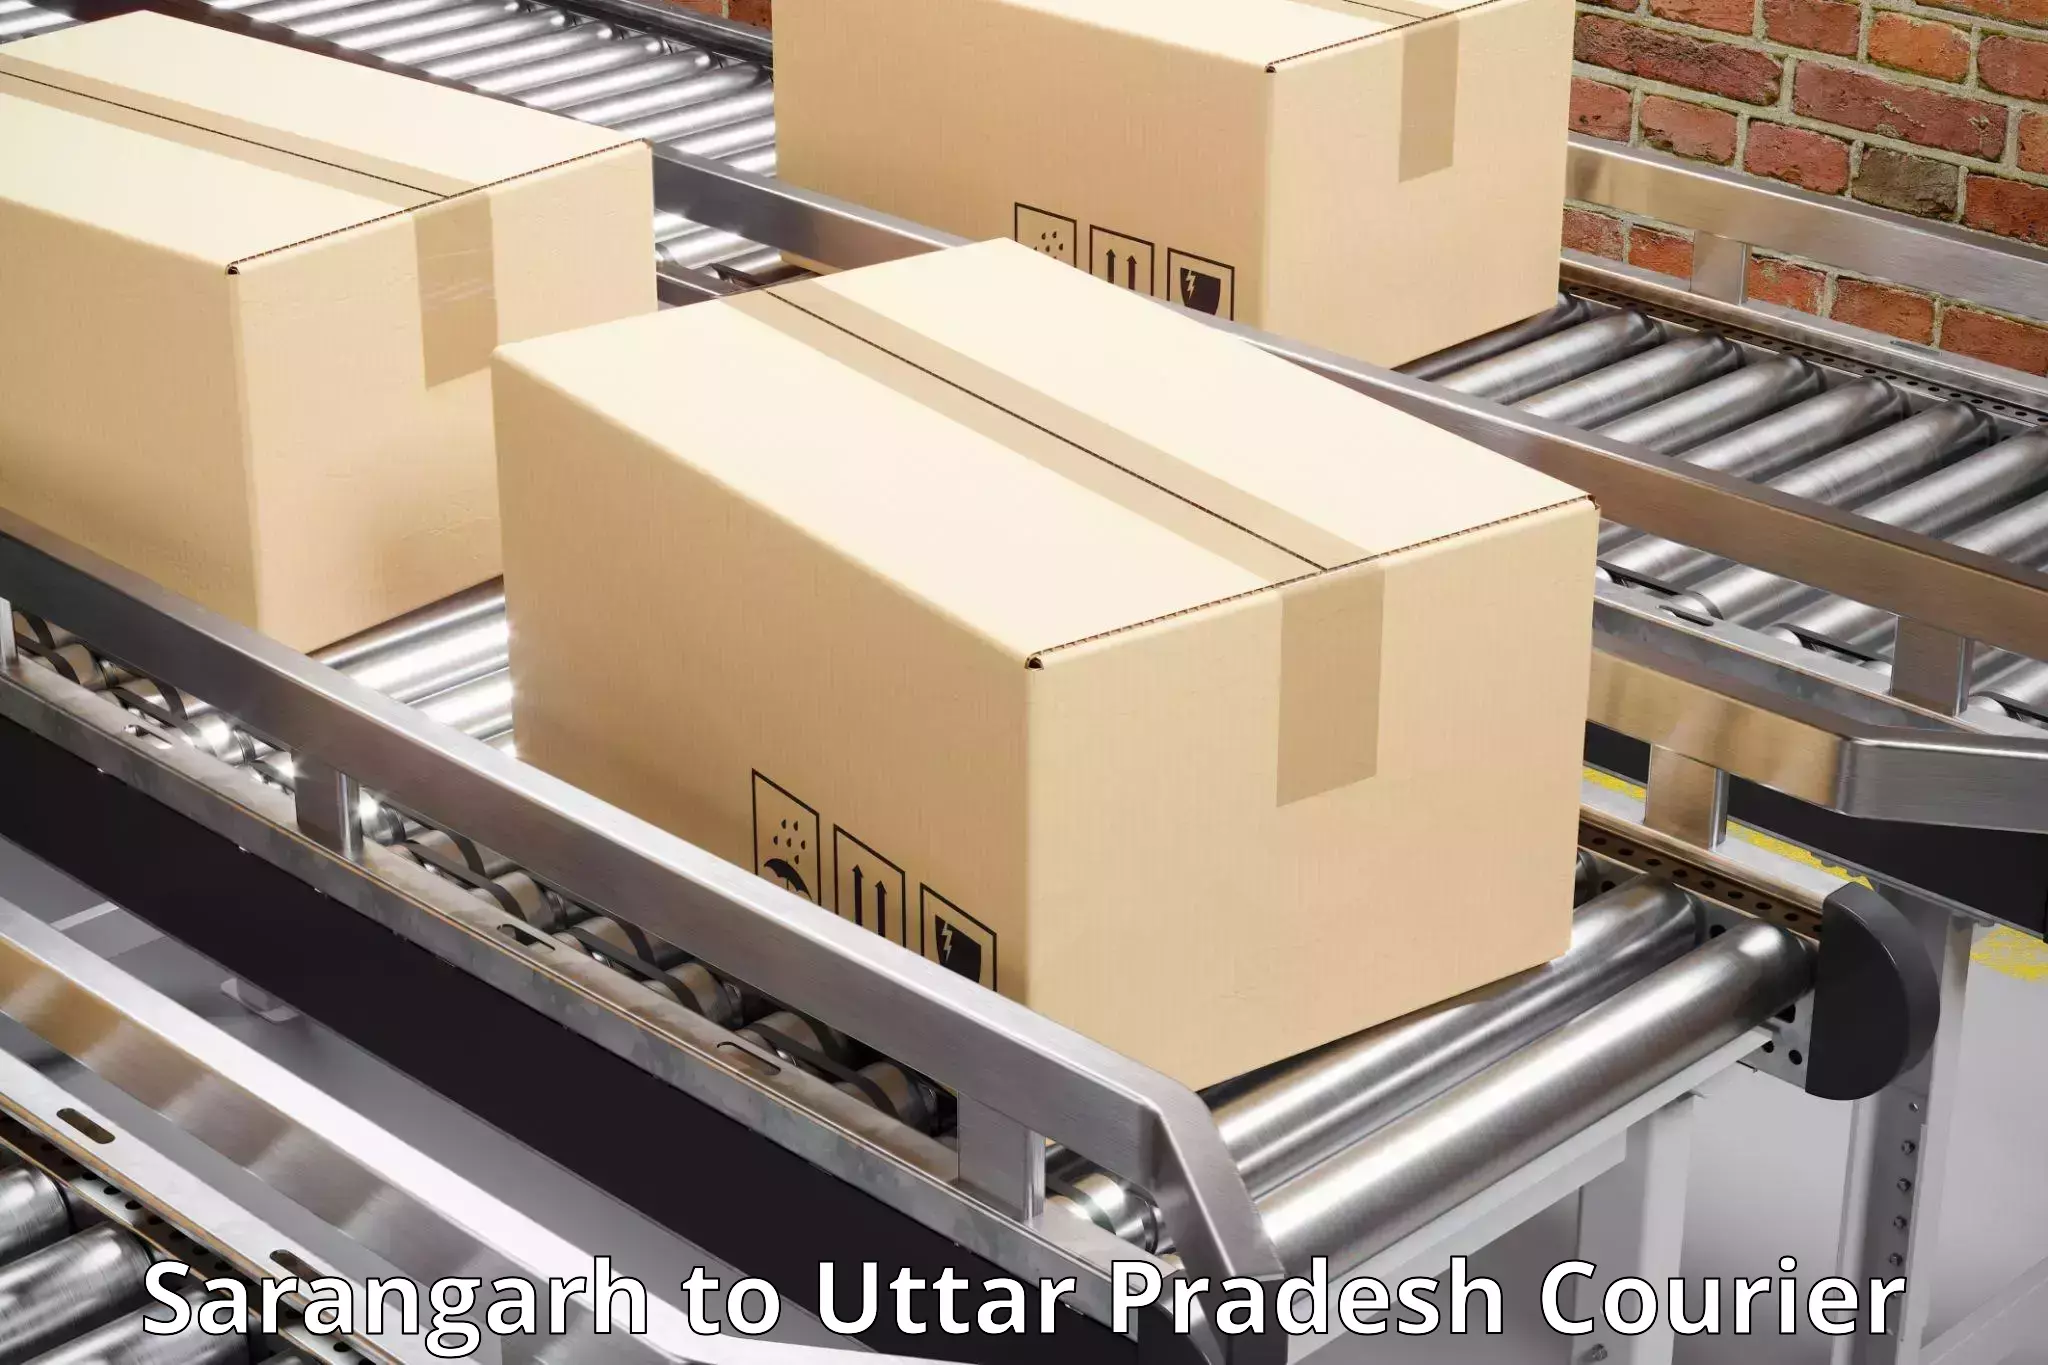 Residential courier service Sarangarh to Fatehabad Agra